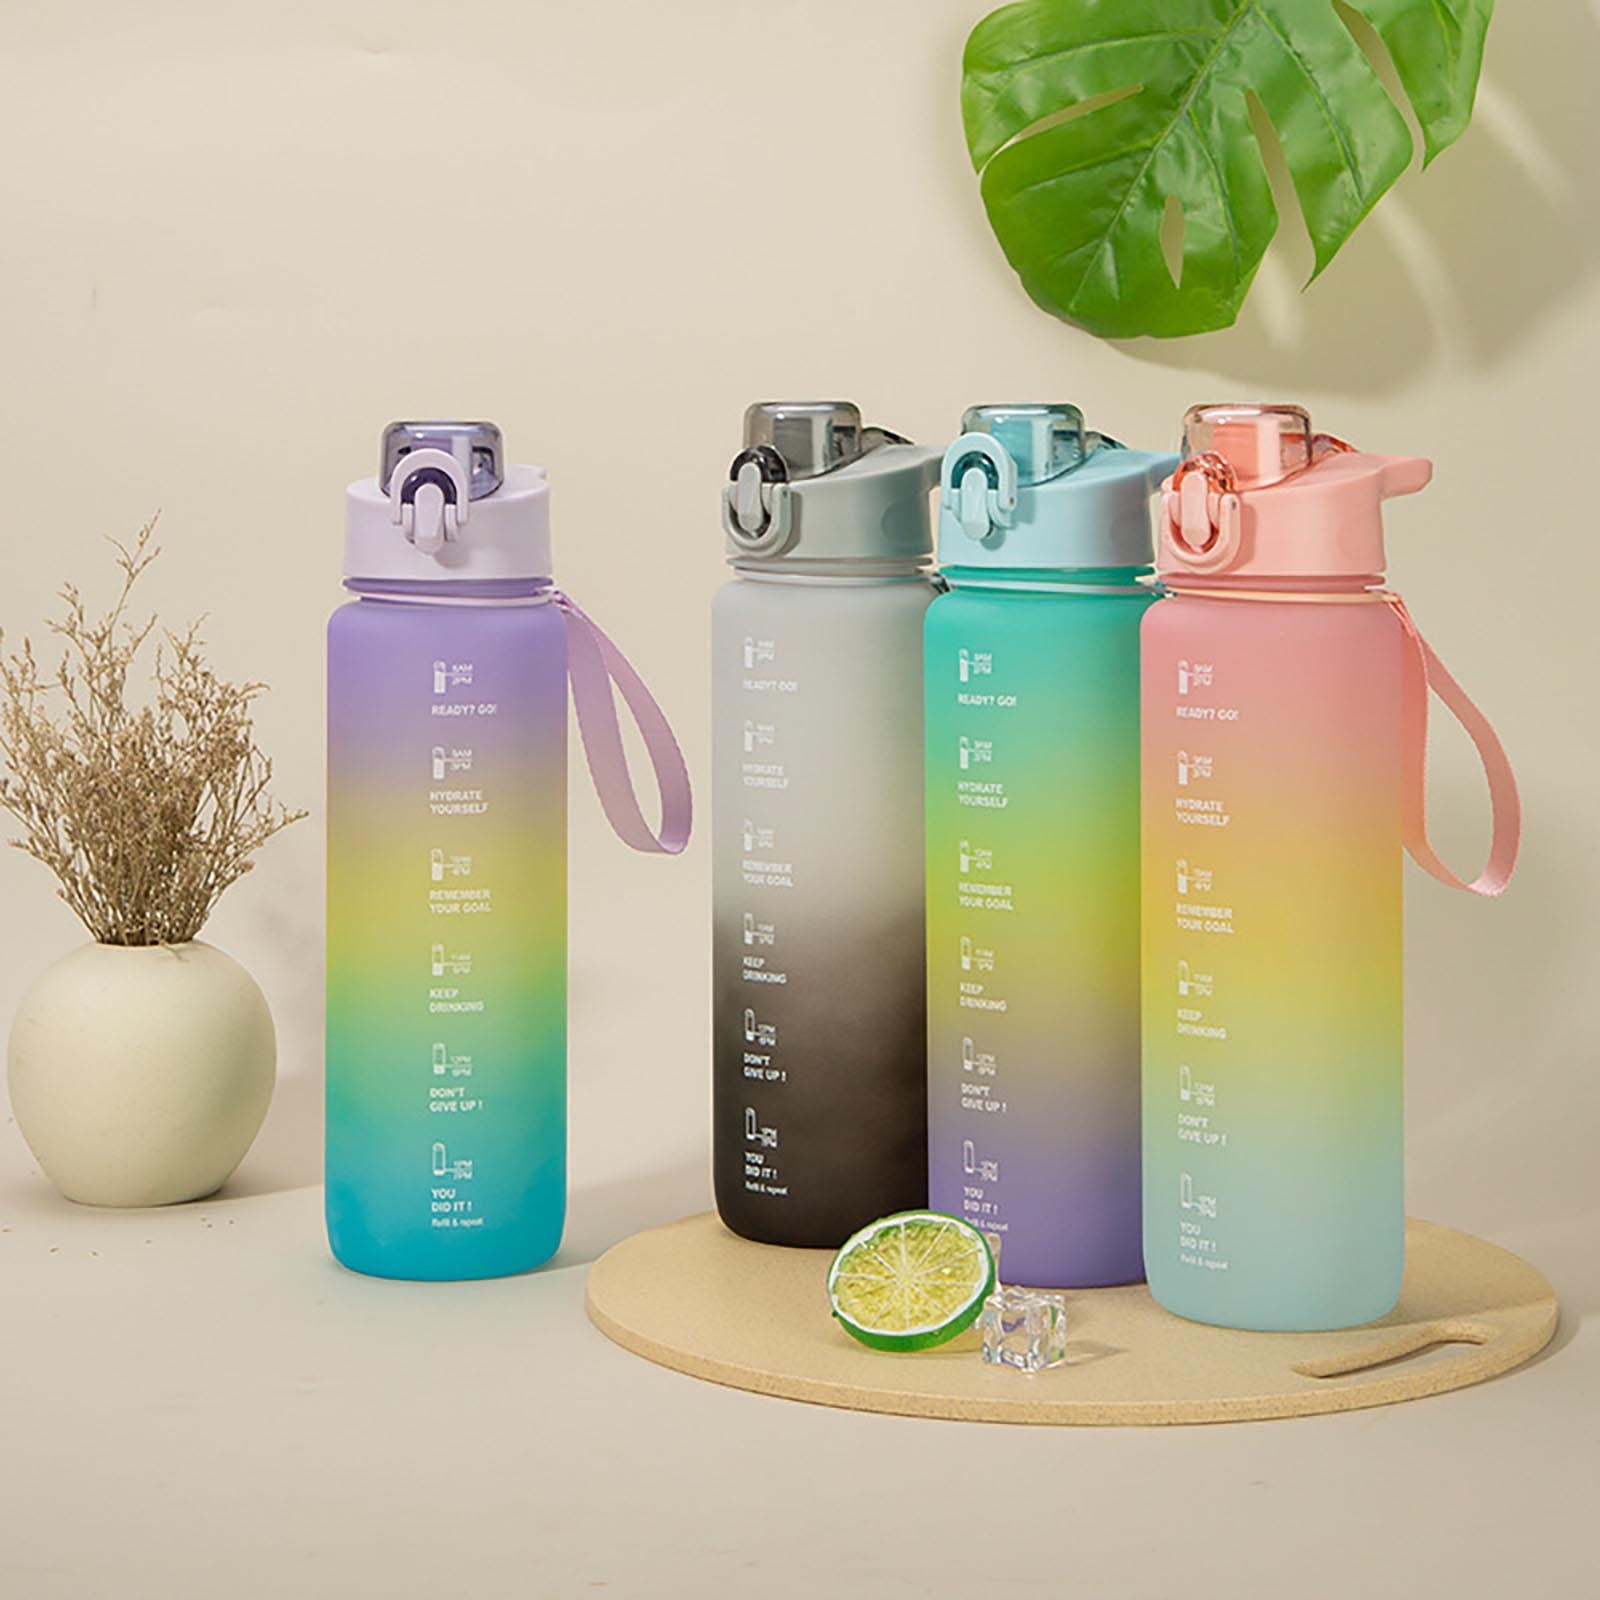 SDJMa Time Marked Cute Water Bottles For Women And Men, BPA Free Frosted &  Aesthetic Sport Water Bottle With Time Marker, Water Bottle 1 Liter | 32 Oz